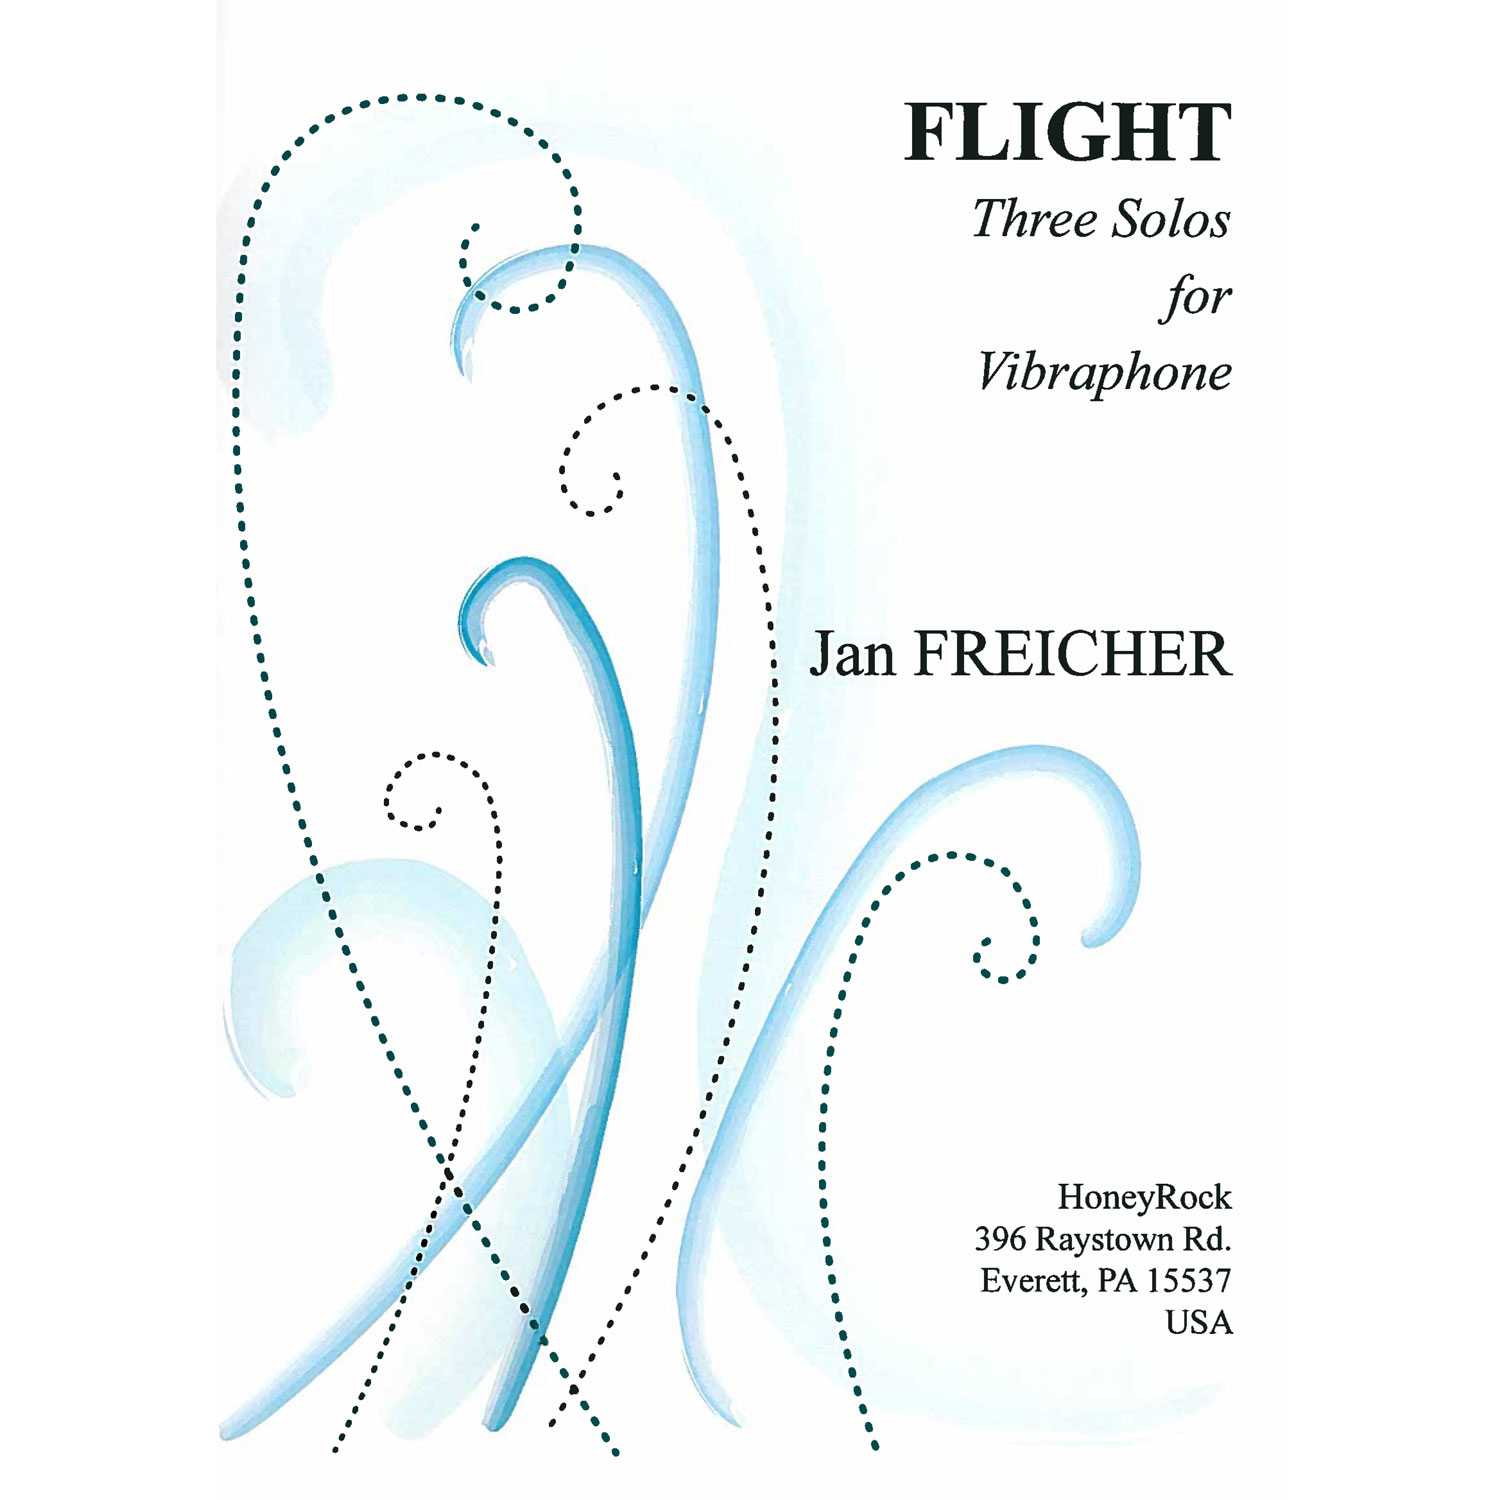 Flight Three Solos for Vibraphone by Jan Freicher